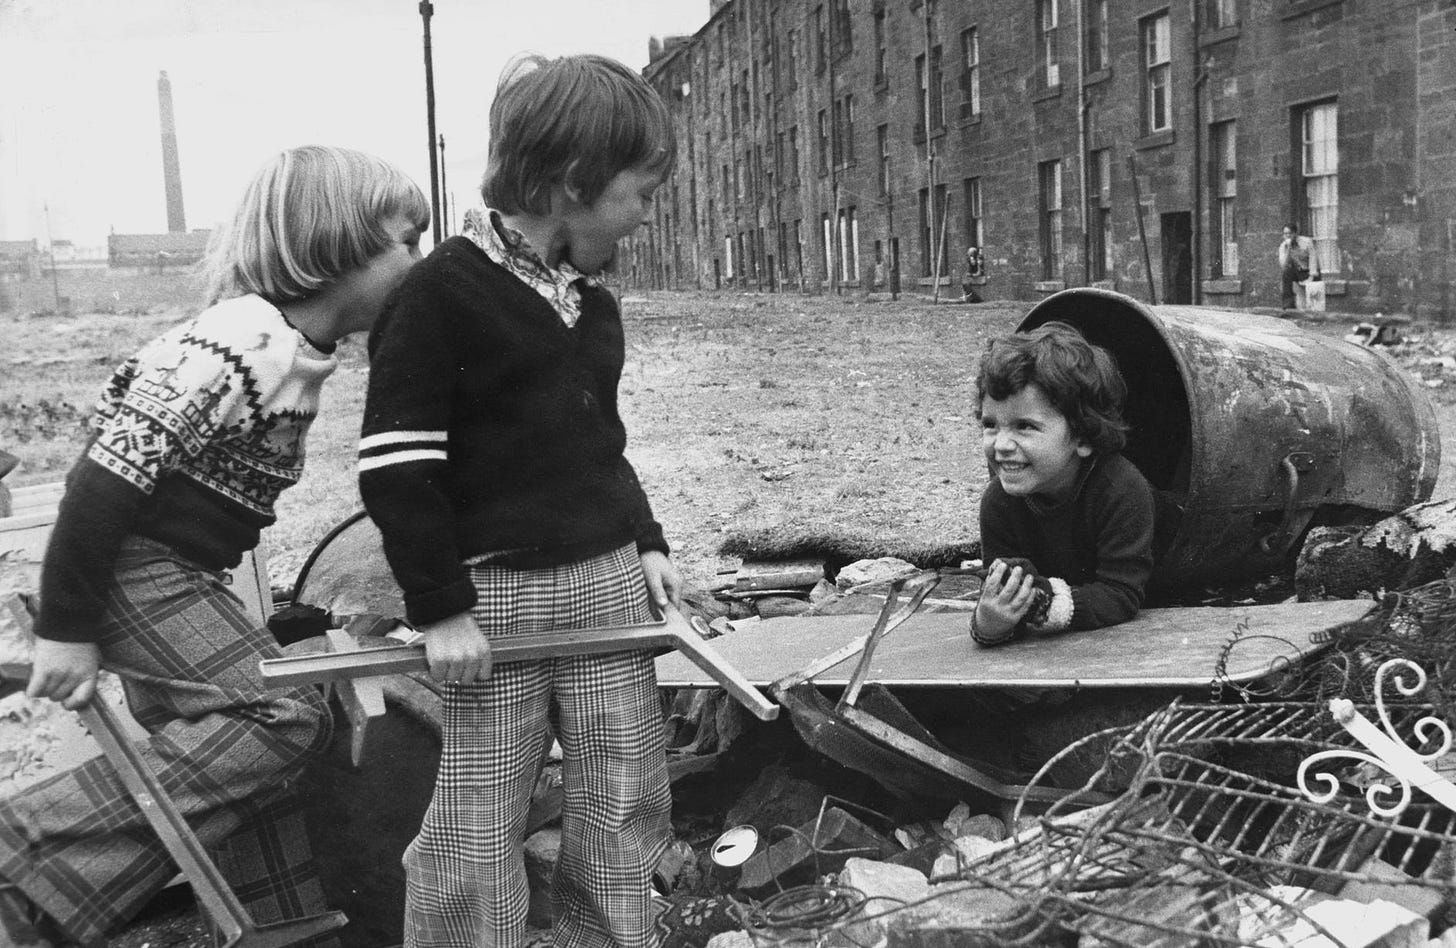 Glasgow Frame by Frame: Children at play - Daily Record